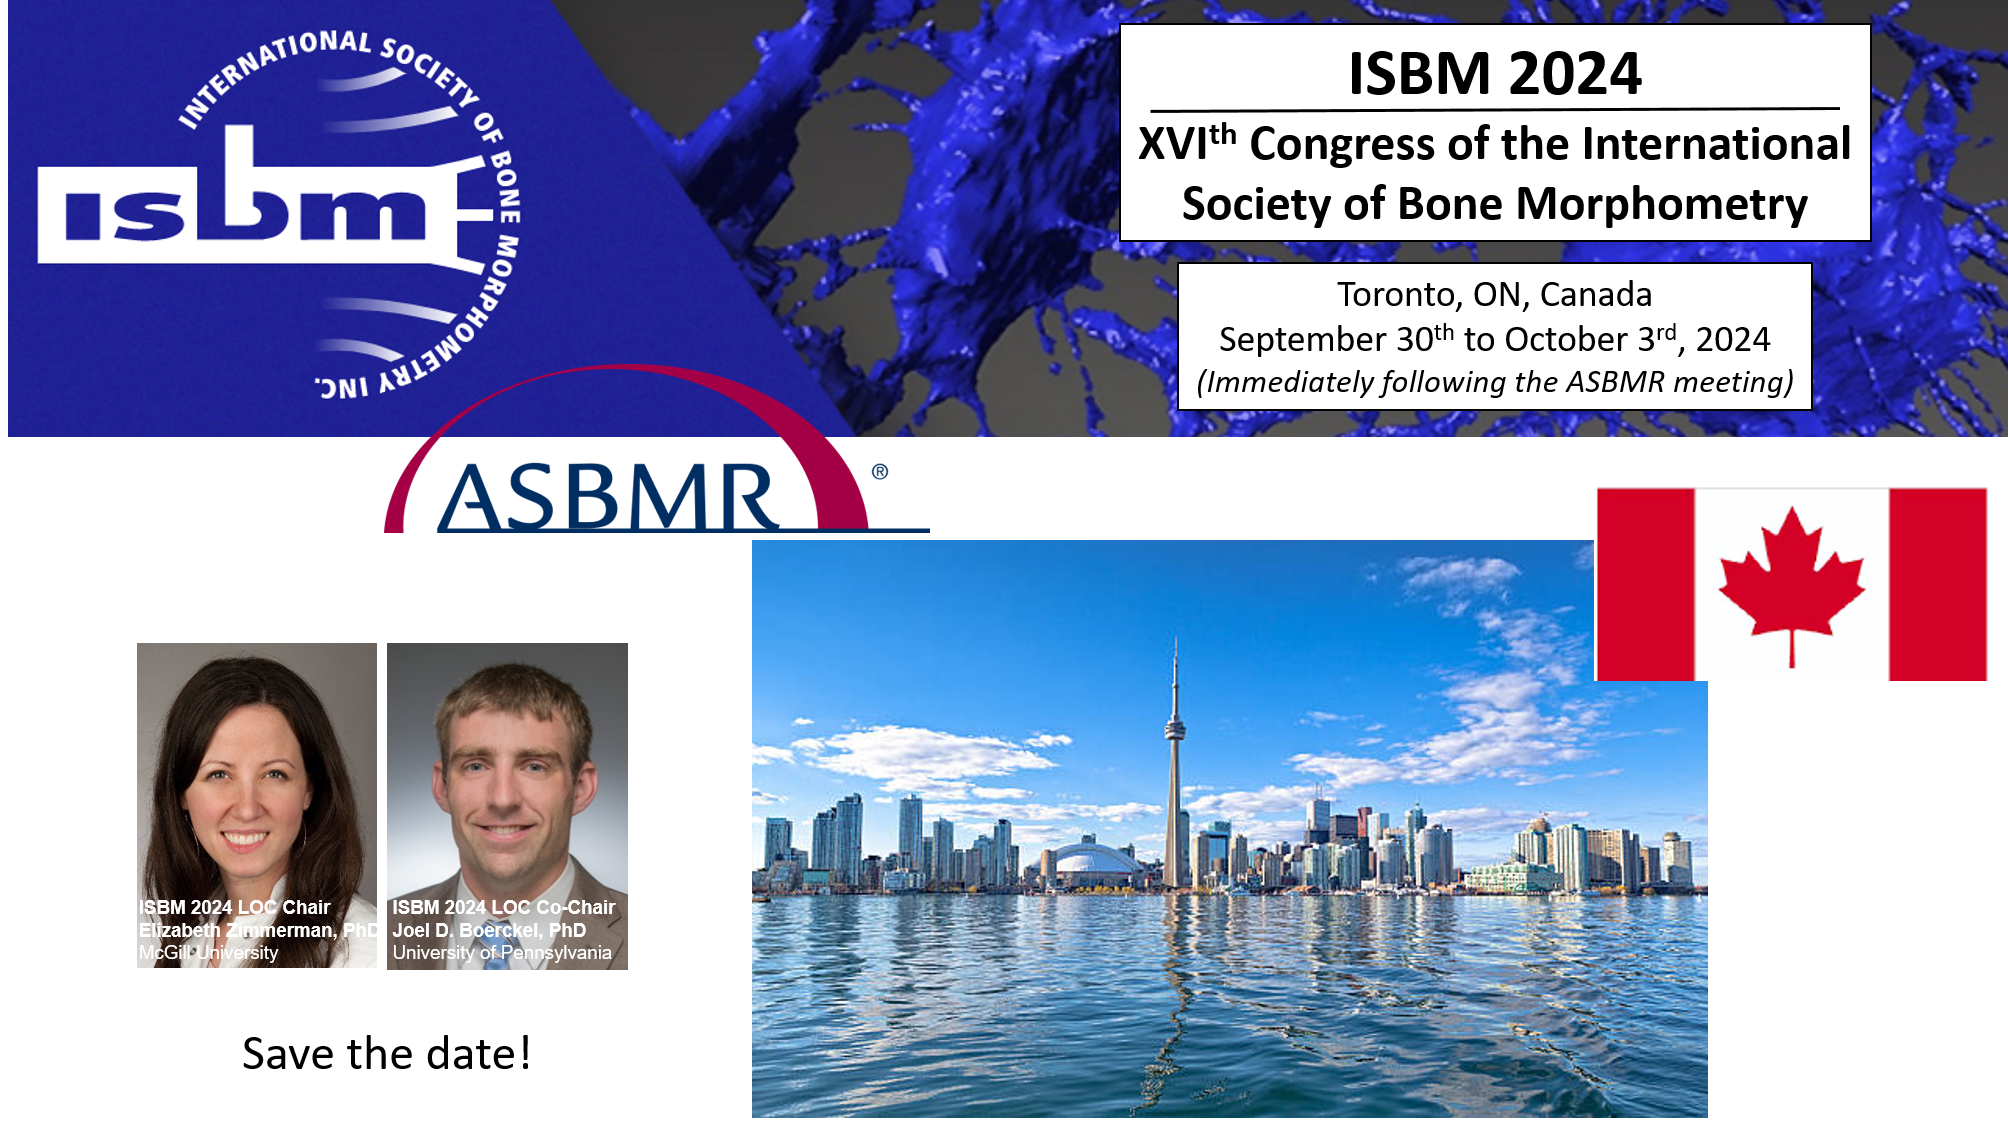 ISBM 2024 save the date